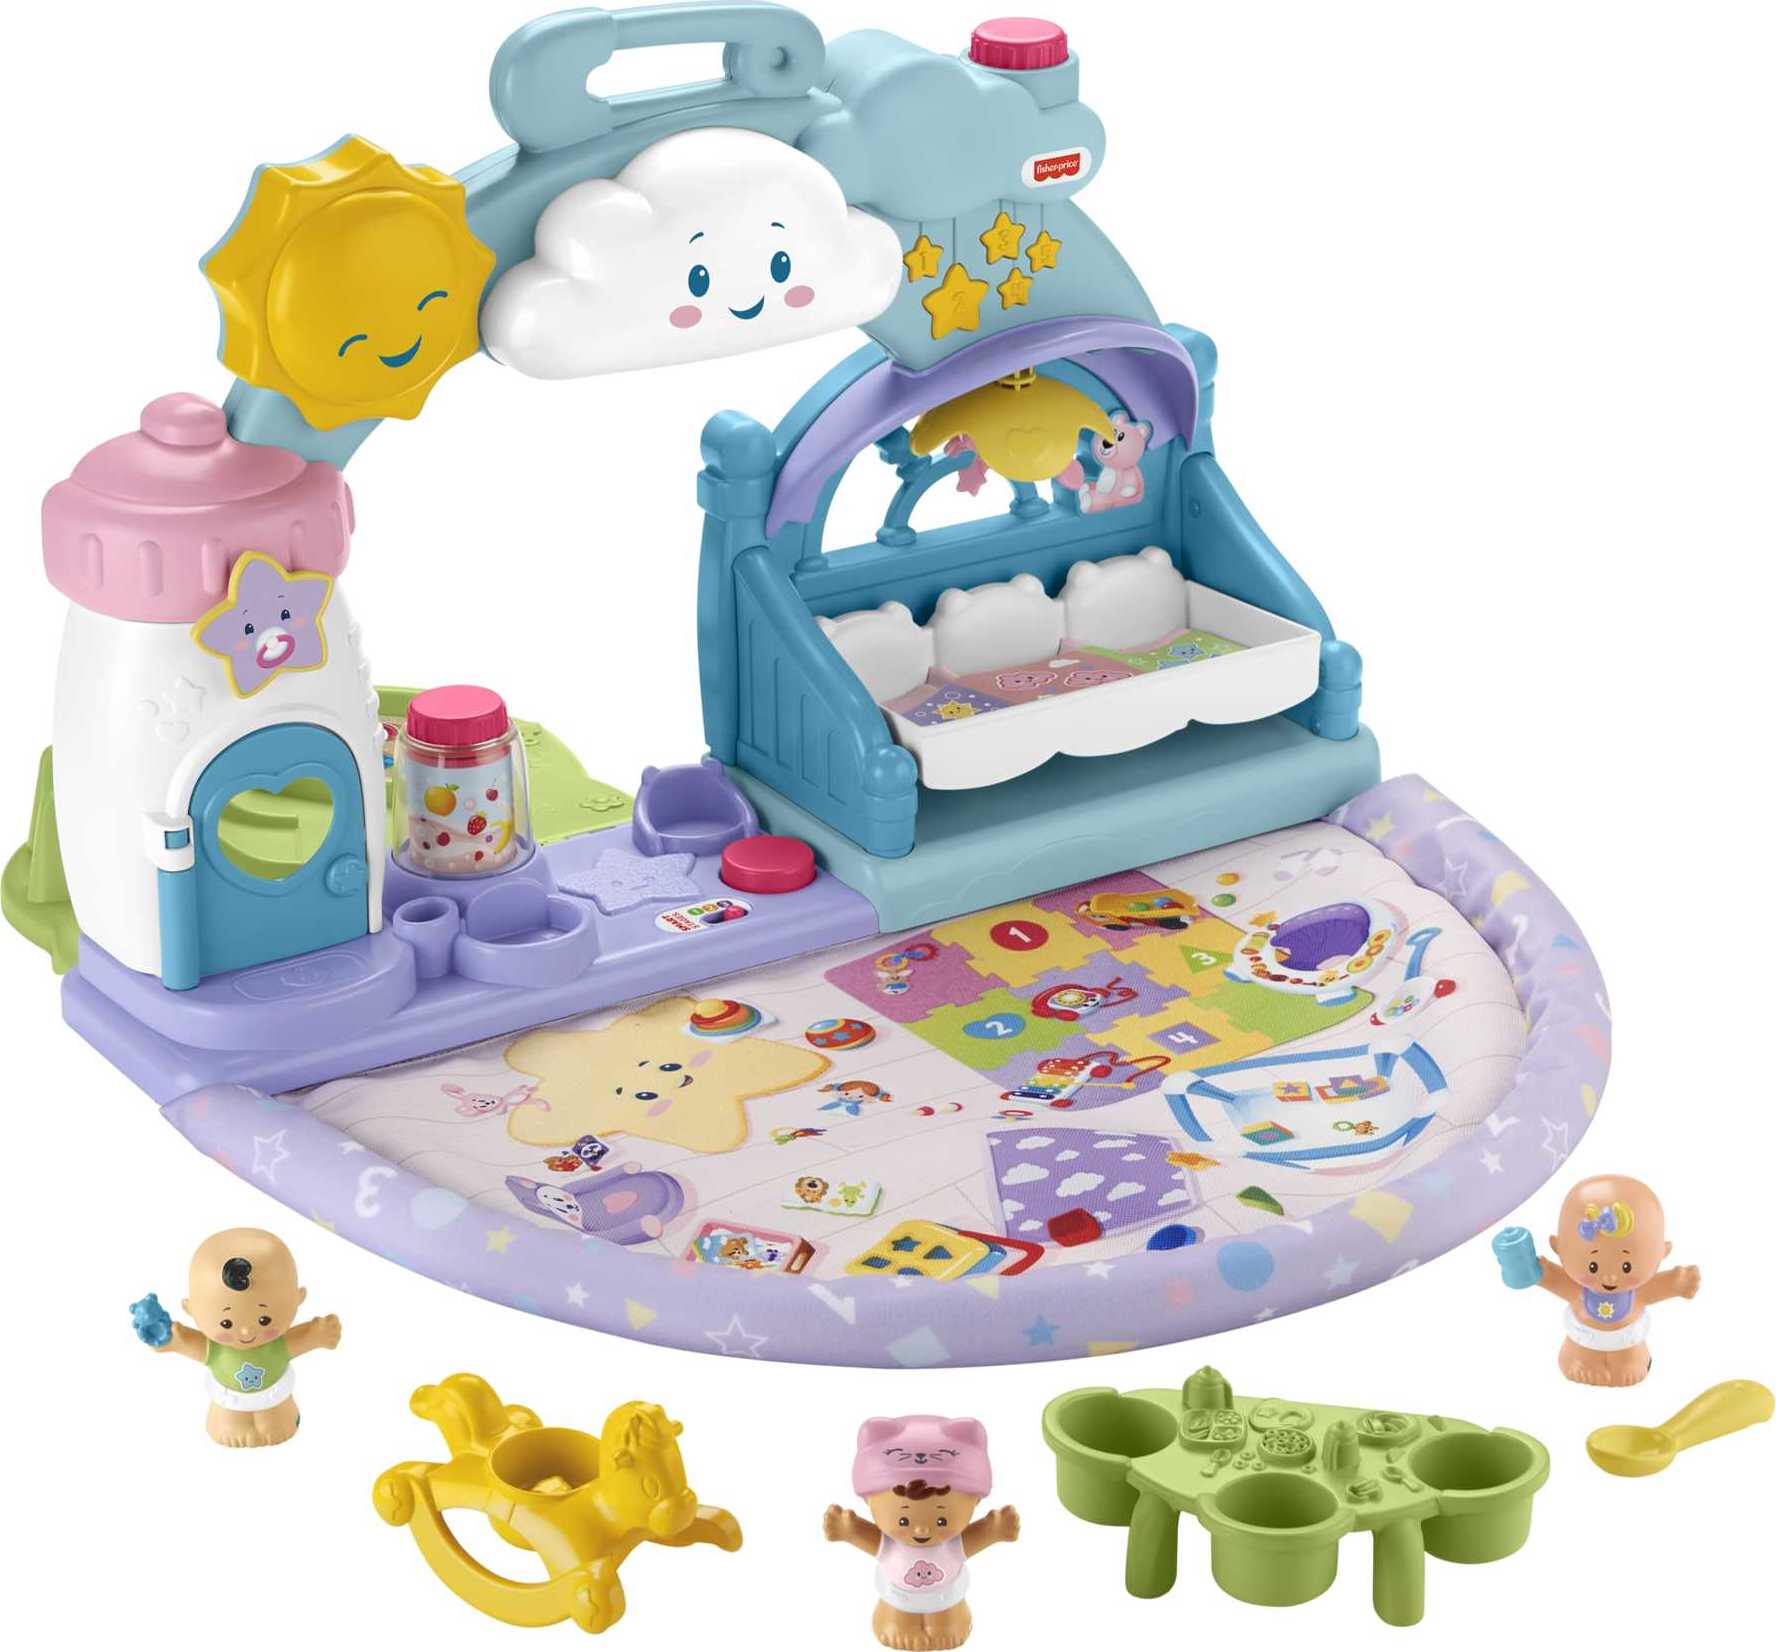 Fisher-Price Little People 1-2-3 Babies Playdate Musical Playset with 3 Multi-color Baby Dolls - image 1 of 7